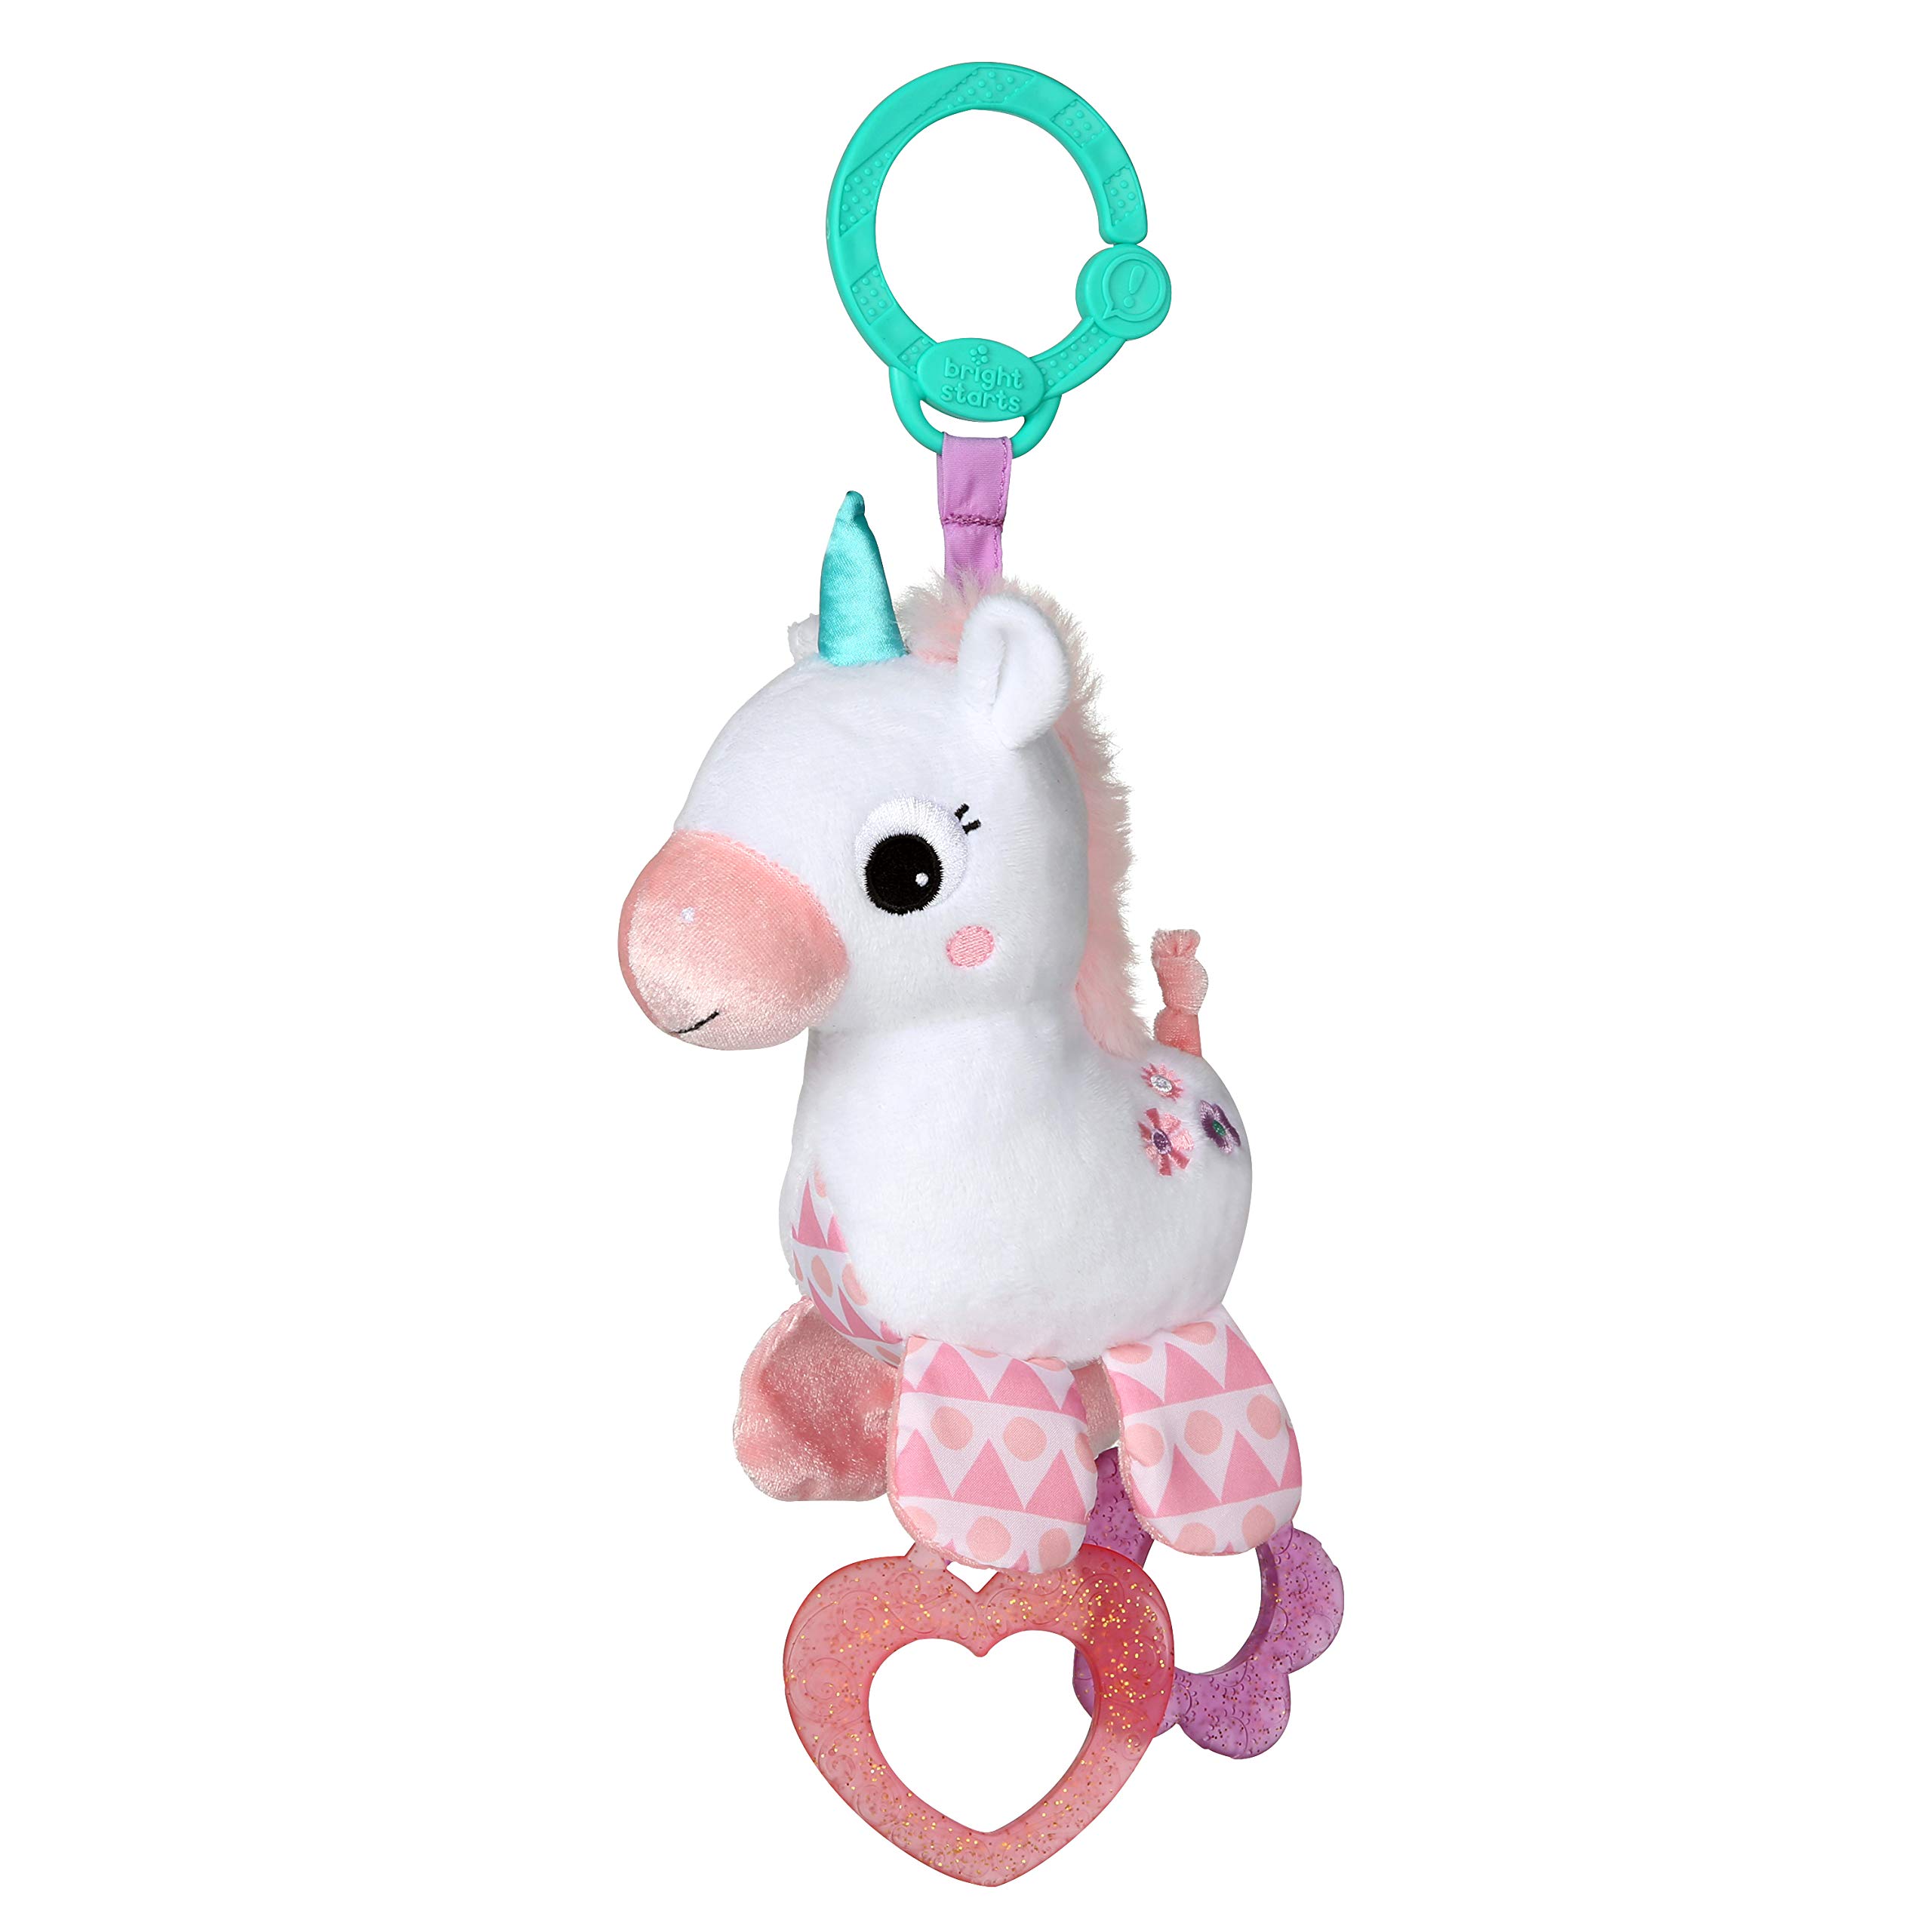 Bright Starts Unicorn Sparkle & Shine Plush Take-Along Stroller or Carrier Toy, Ages 0 Month+, Pink